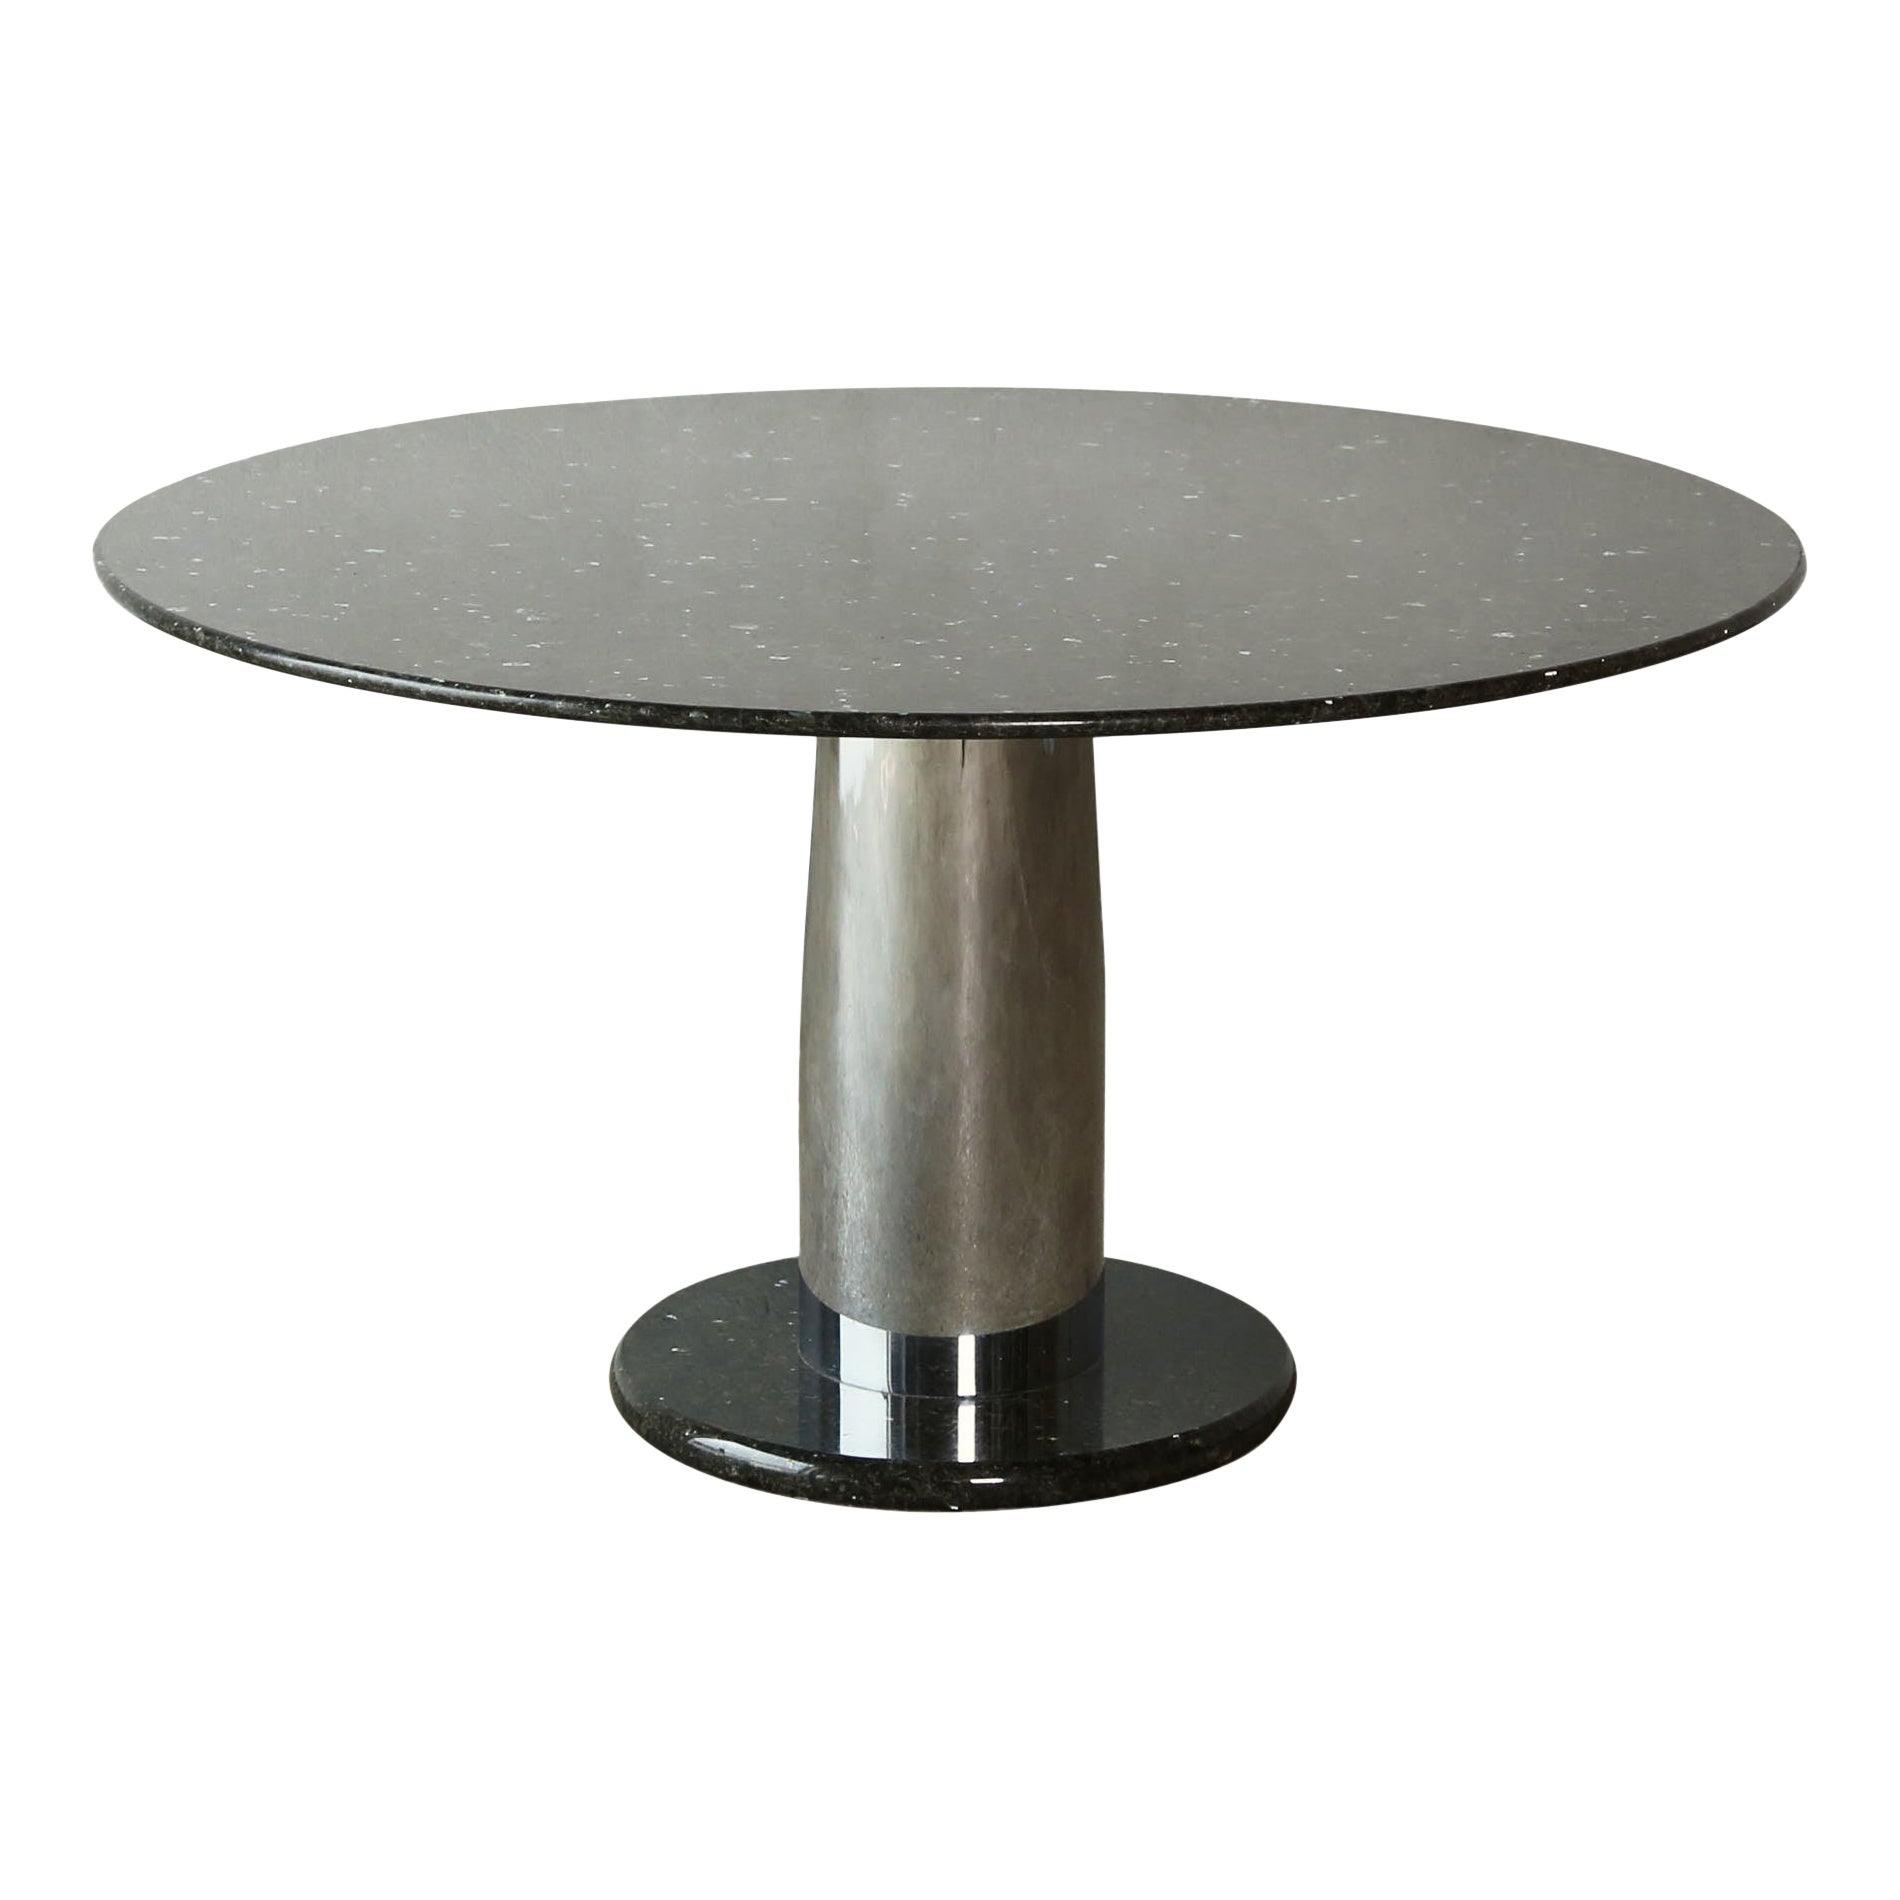 Ettore Sottsass Lotto Rosso Round Dining Table, Poltronova, Italy, 1980s For Sale